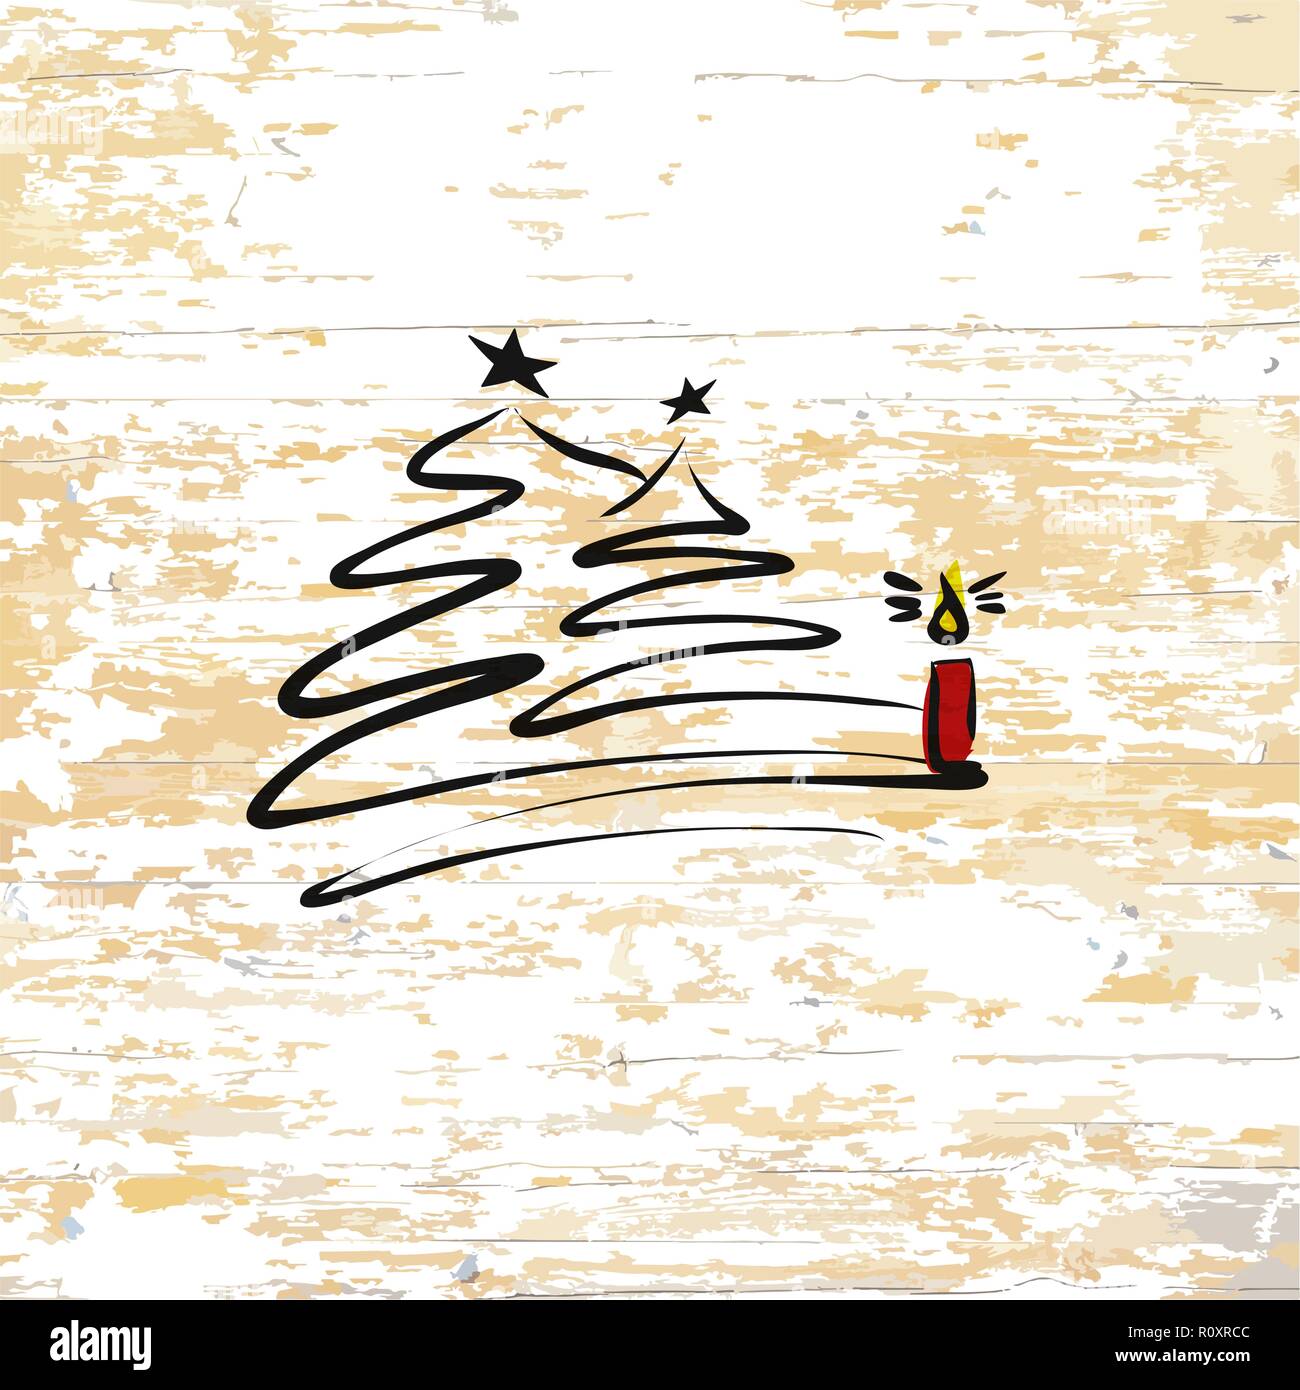 Christmas tree with candle sketch on wooden background. Vector illustration drawn by hand. Stock Vector